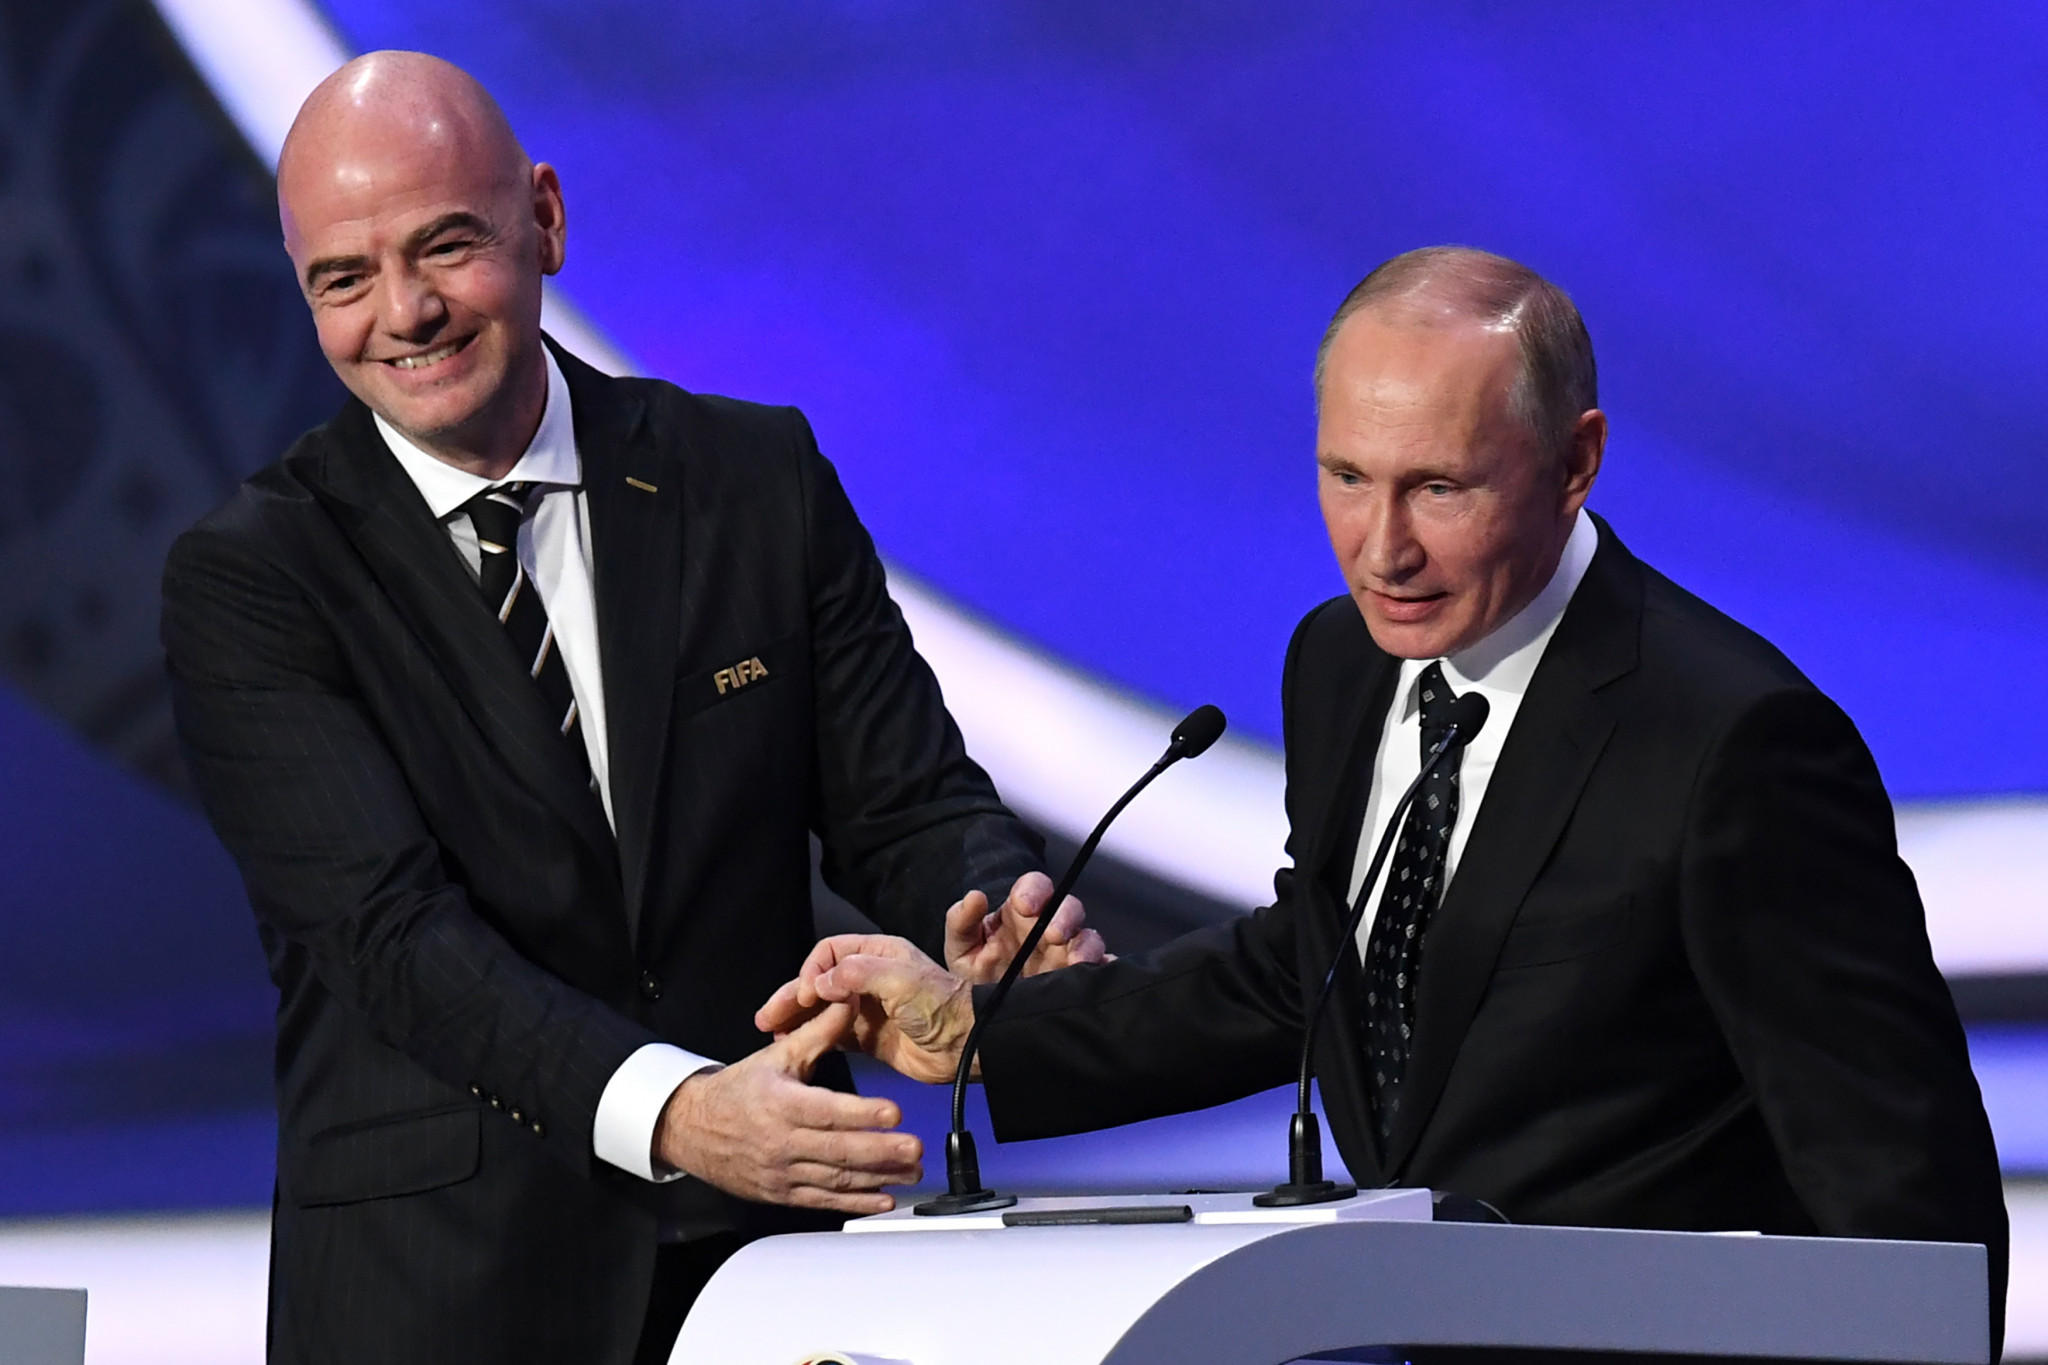 FIFA President Gianni Infantino enthusiastically greets Vladimir Putin at the World Cup draw in Moscow but he was probably less impressed with the performance earlier of Deputy Prime Minister Vitaly Mutko ©Getty Images